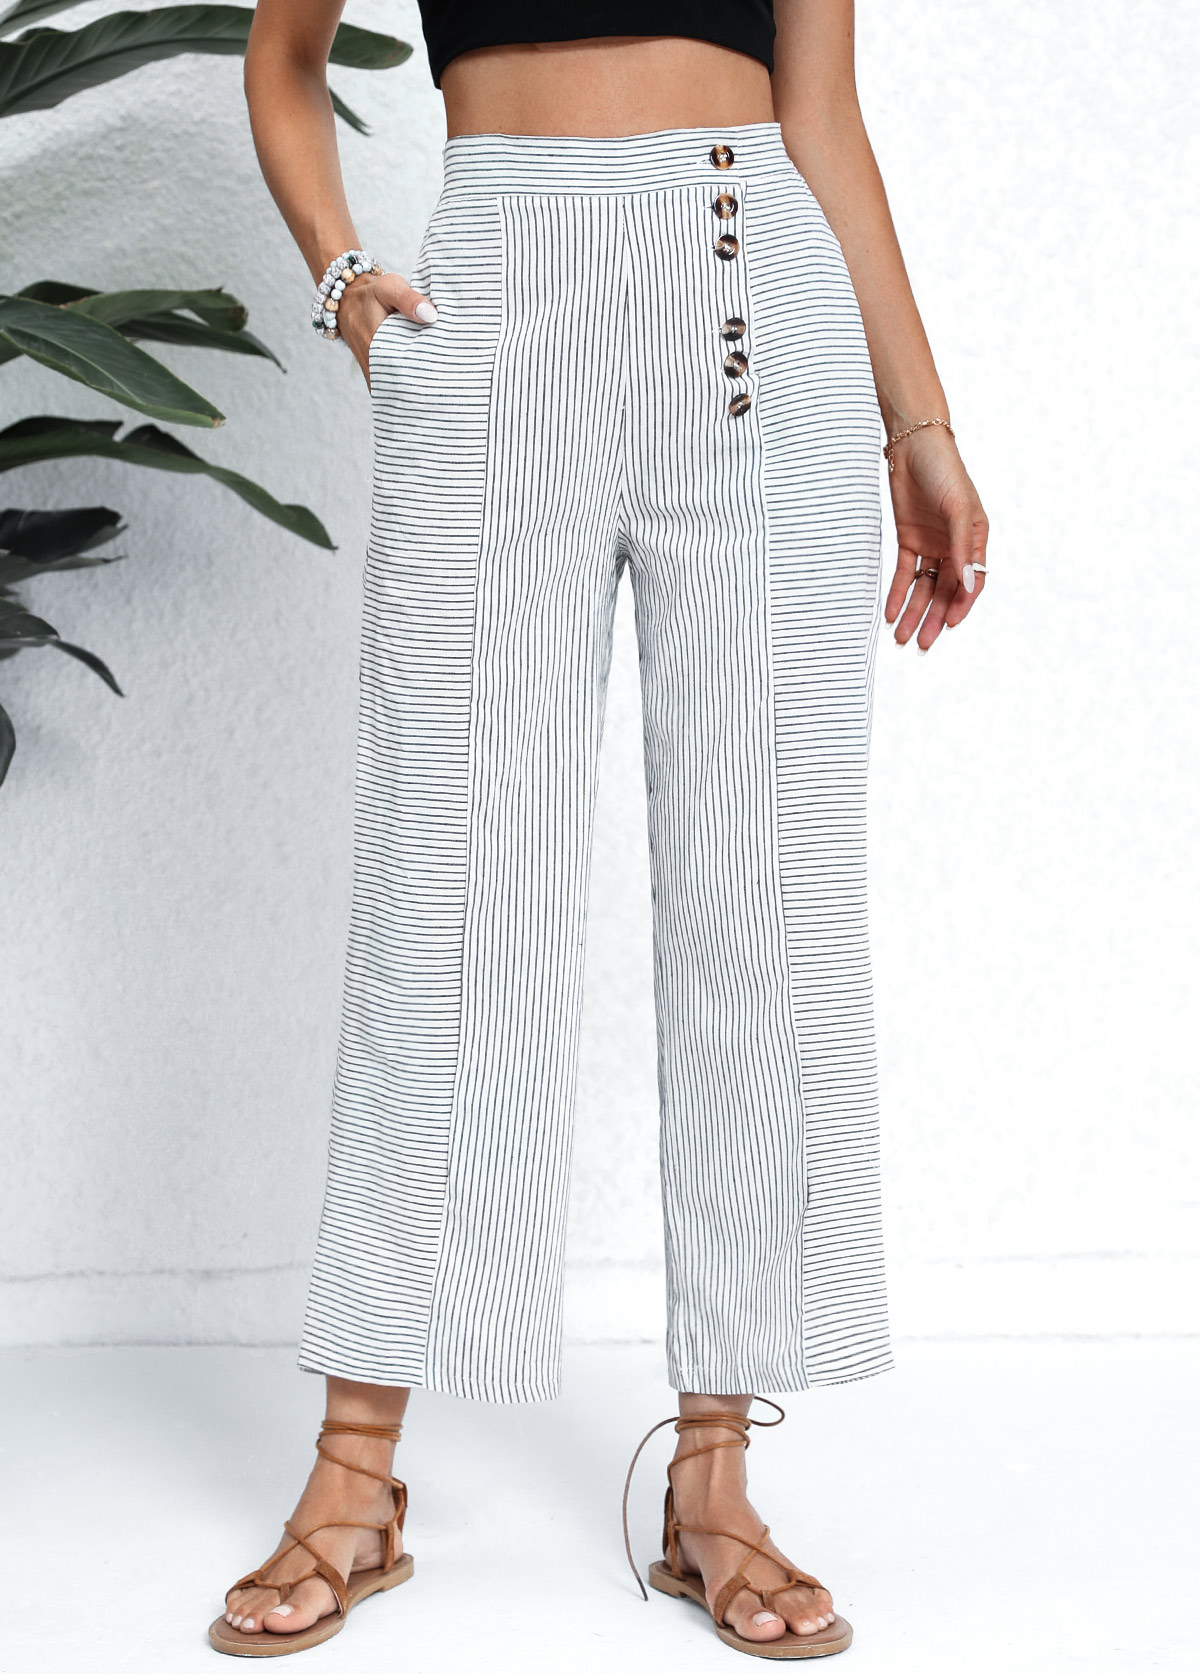 Pocket Striped White Button Fly High Waisted Pants